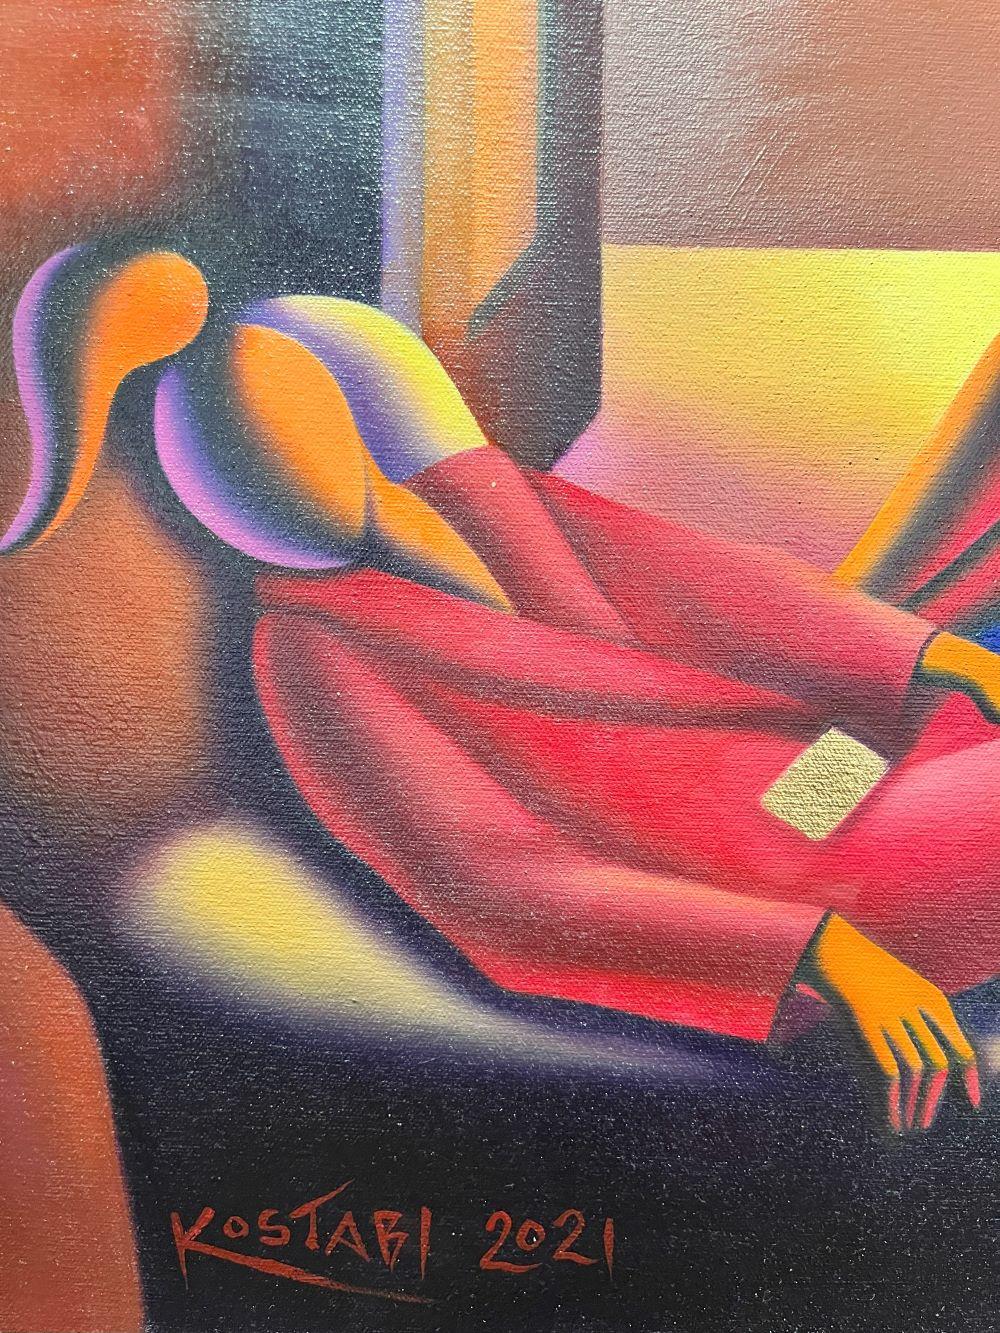 Twilight Serenity is an oil on canvas painting, 31.5 x 23.75 inches, signed and dated 'KOSTABI 2021' lower left. Framed in a contemporary black frame.
